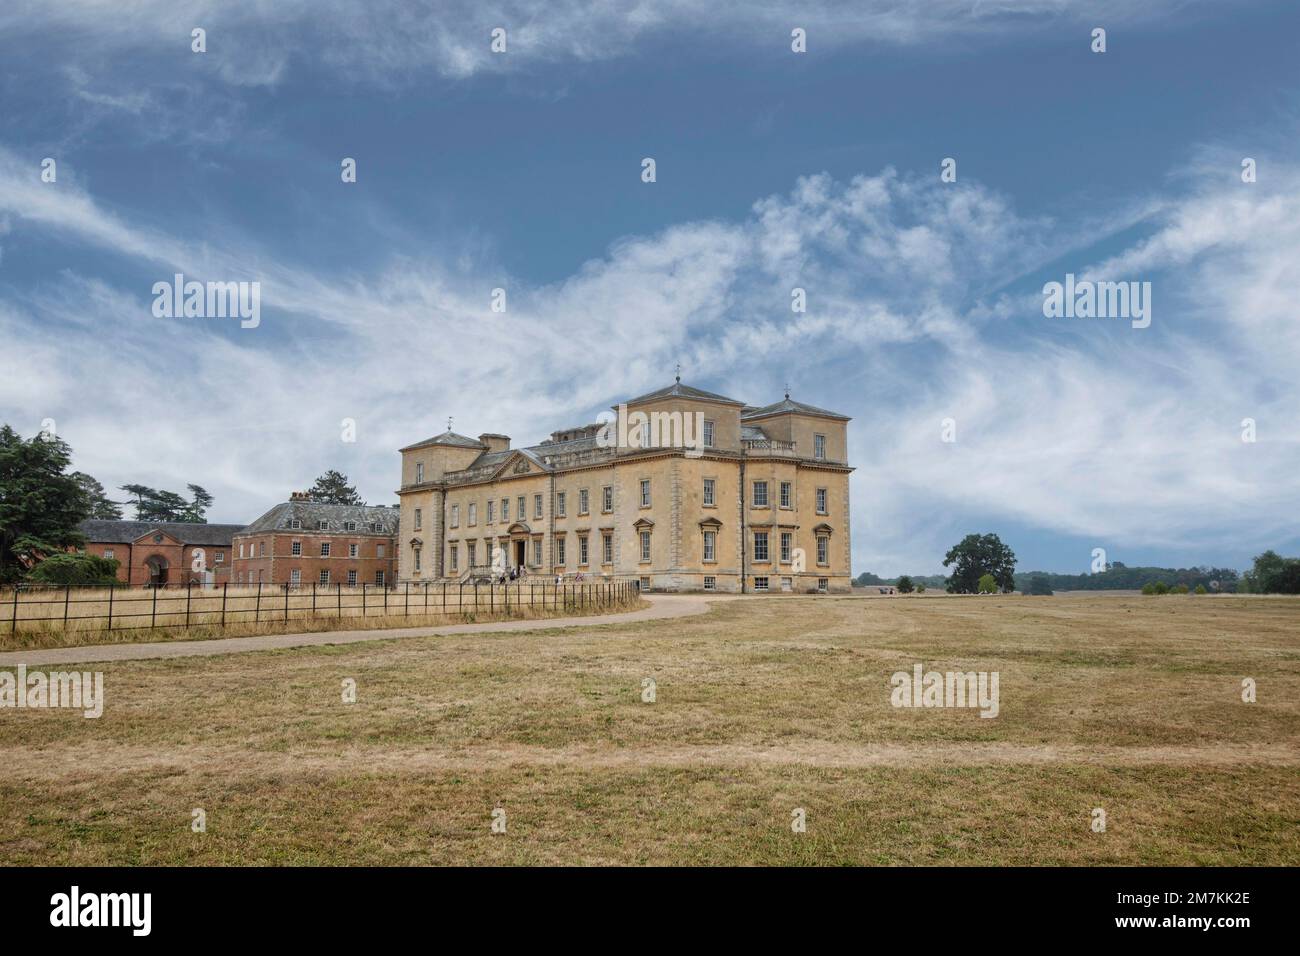 A view of Croome court 18th century mansion Worcestershire England Stock Photo